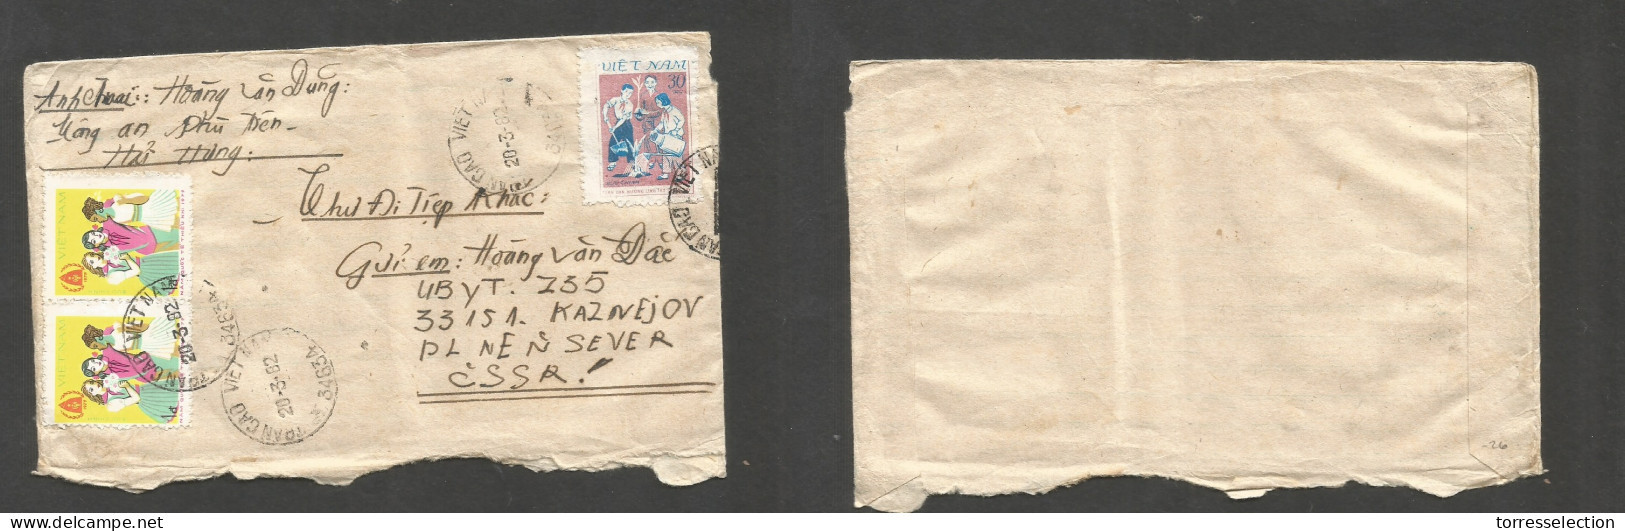 INDOCHINA. 1982 (20 March) North Vietnam. Trancao - Czech Republic. Color Multifkd Envelope At 2,30d Rate. VF, Tied Cds. - Asia (Other)